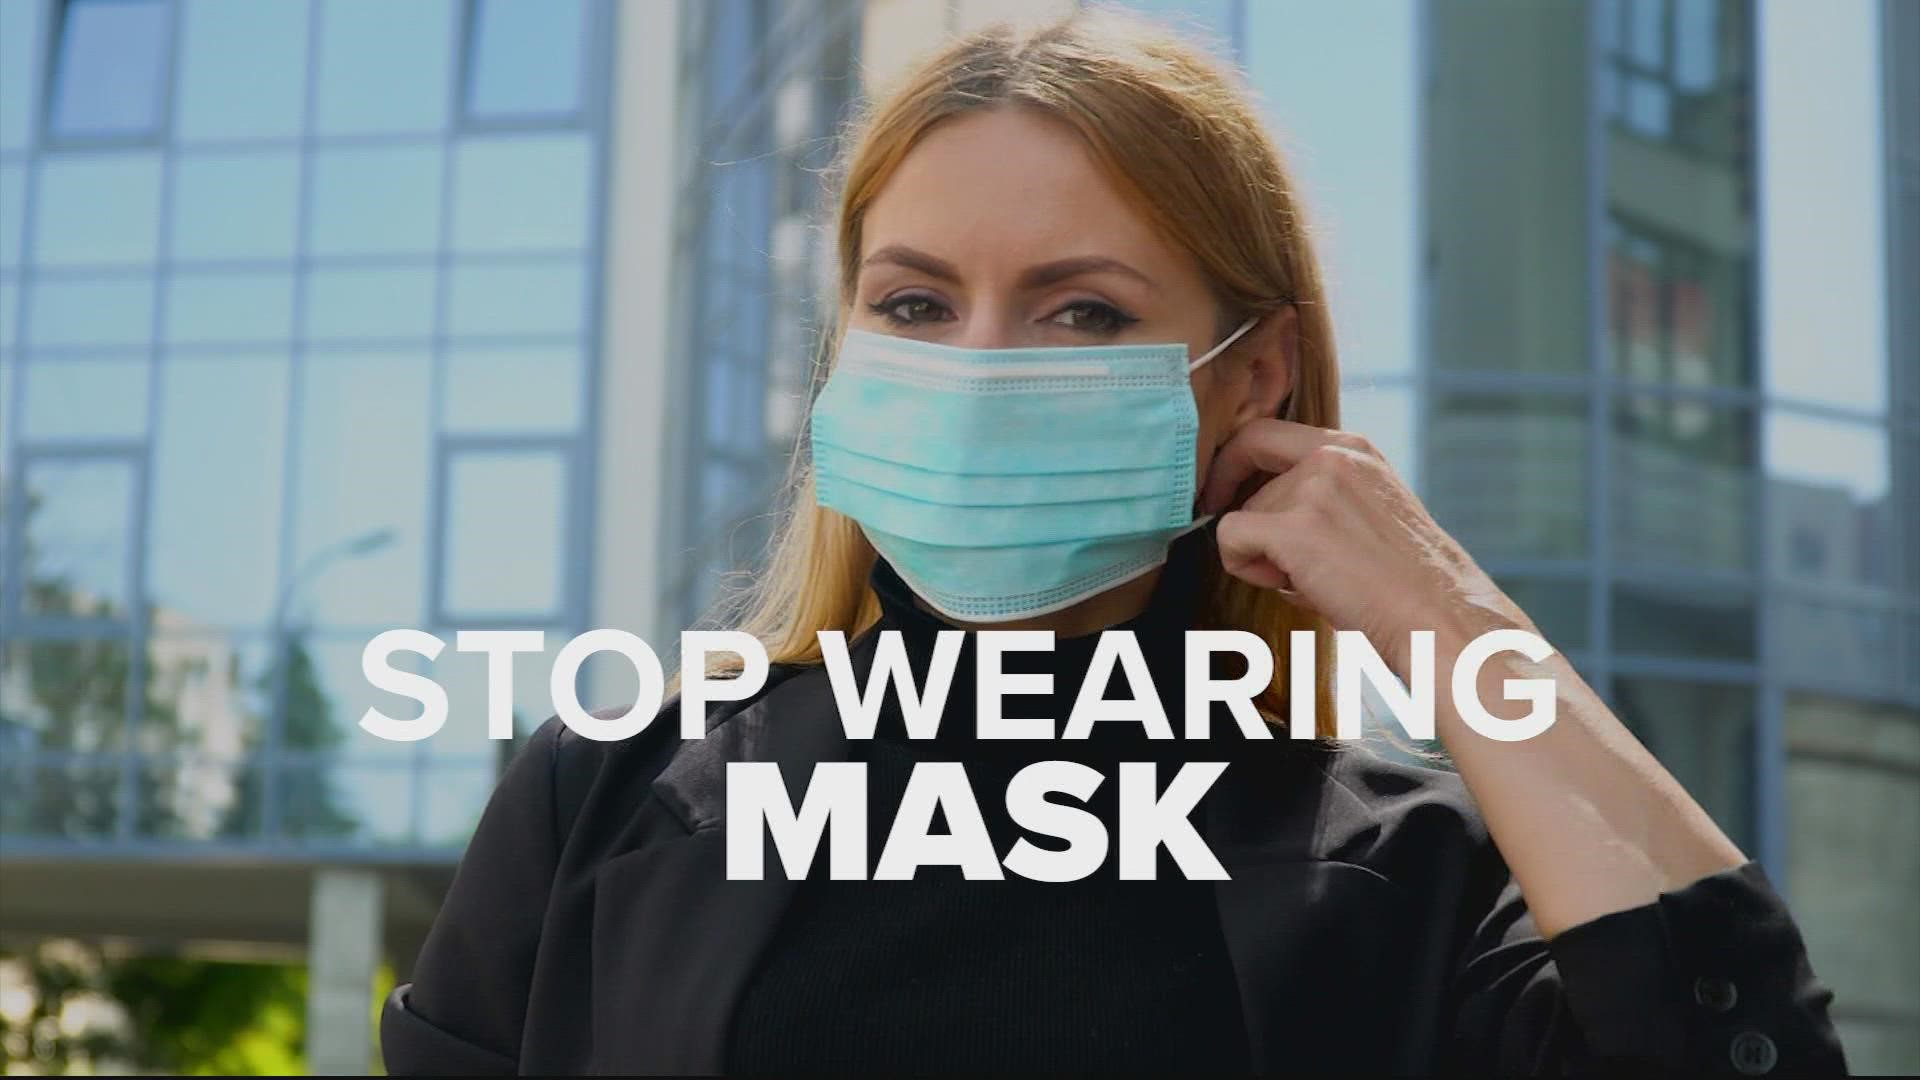 The agency is still advising that people, including schoolchildren, wear masks where the risk of COVID is high. That's the situation for about 28% of Americans.